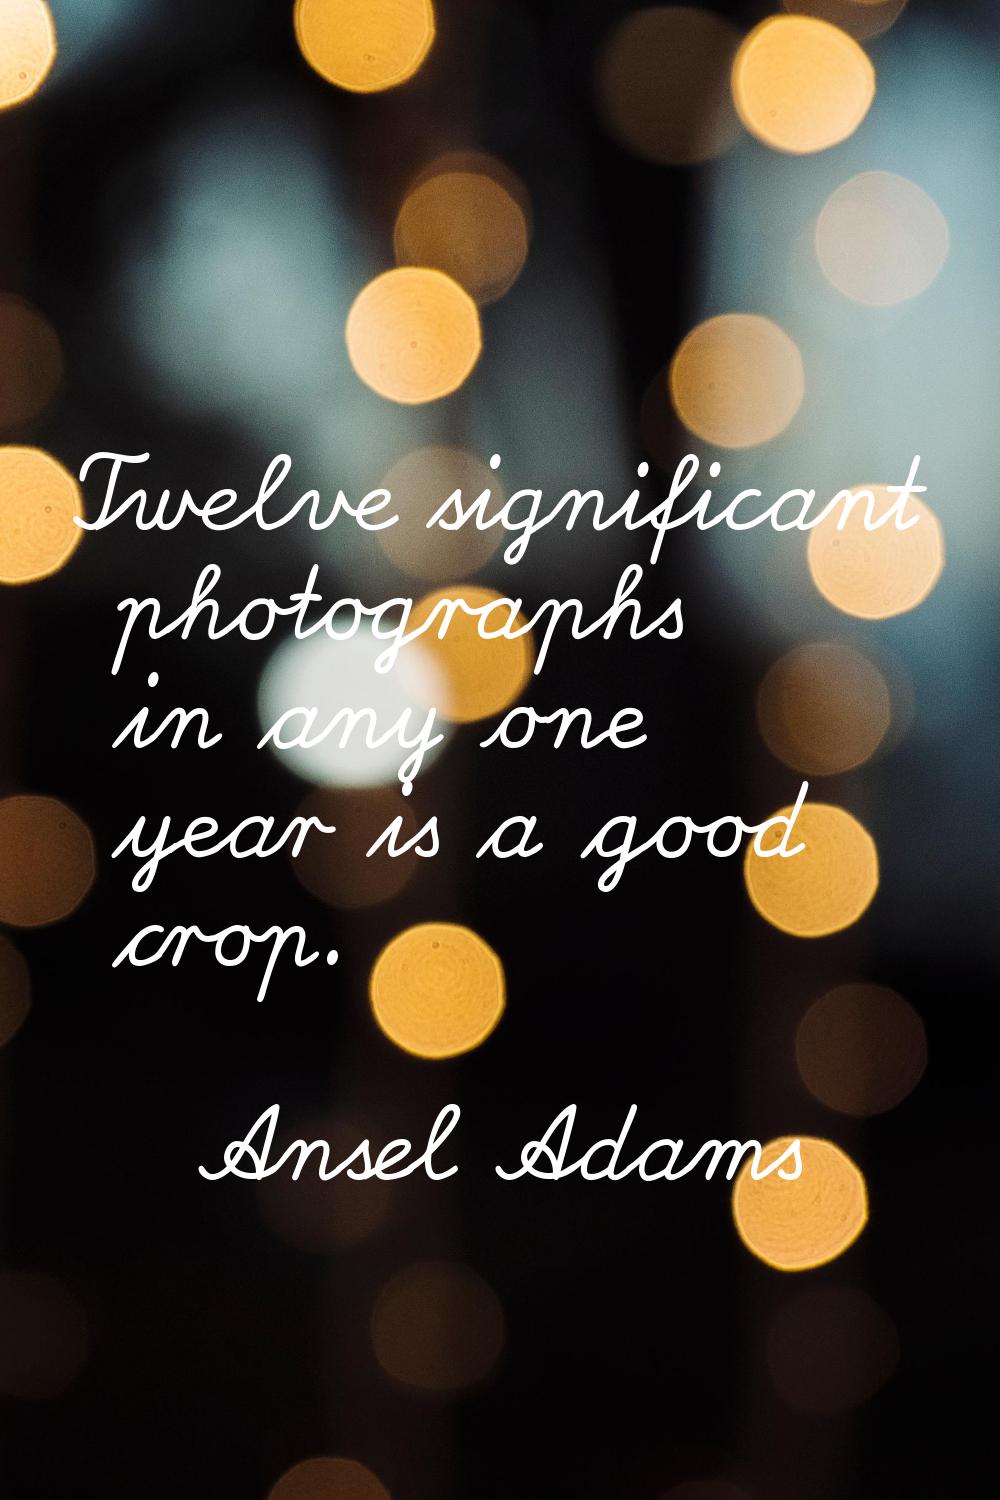 Twelve significant photographs in any one year is a good crop.